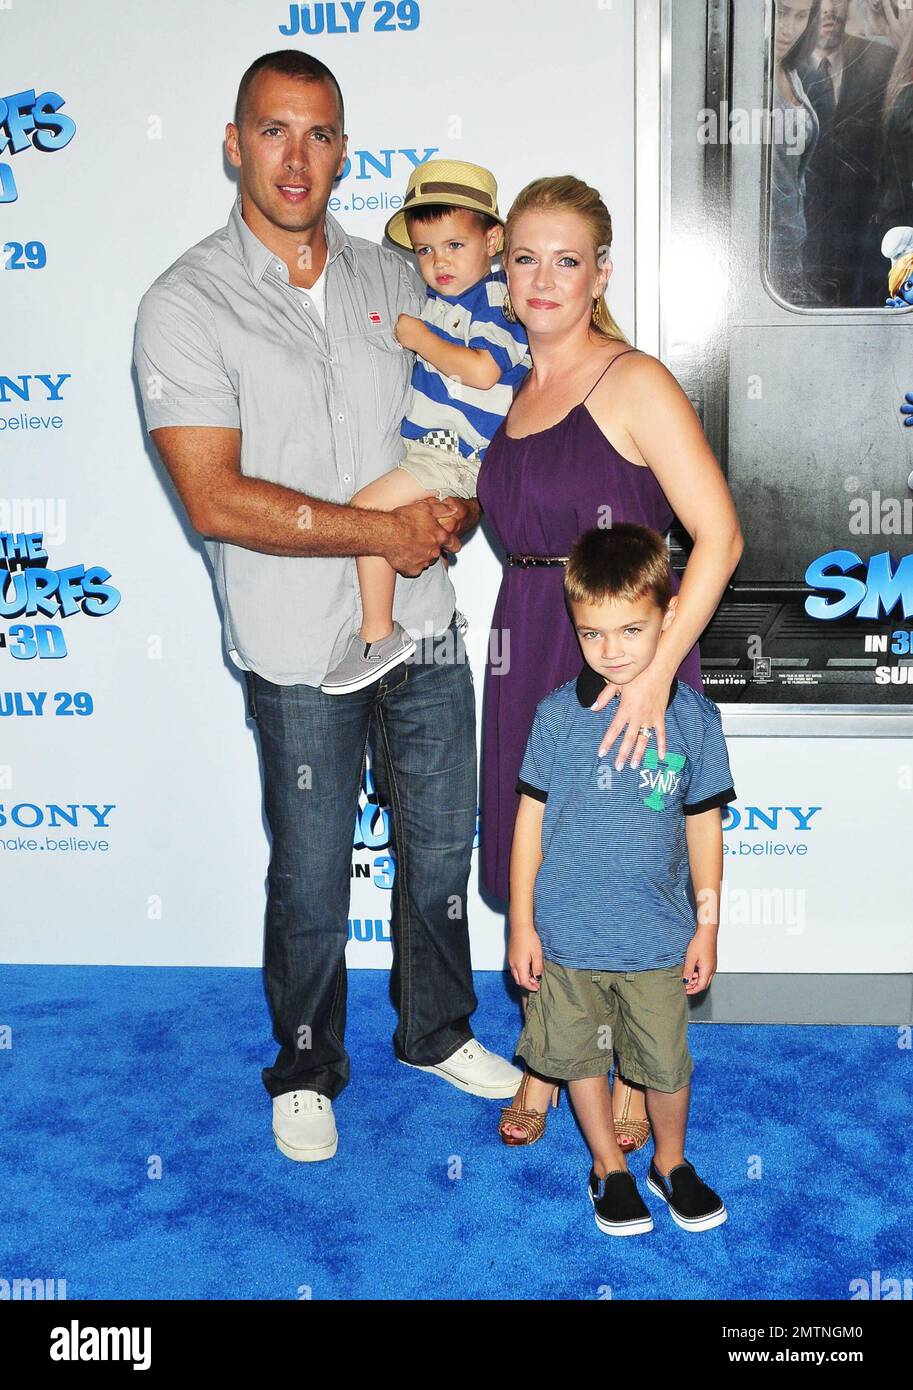 Melissa Joan Hart and family at the Word Premiere of Columbia Pictures' 'Smurfs' at the Ziegfeld Theater.  New York, NY 7/24/2011 Stock Photo